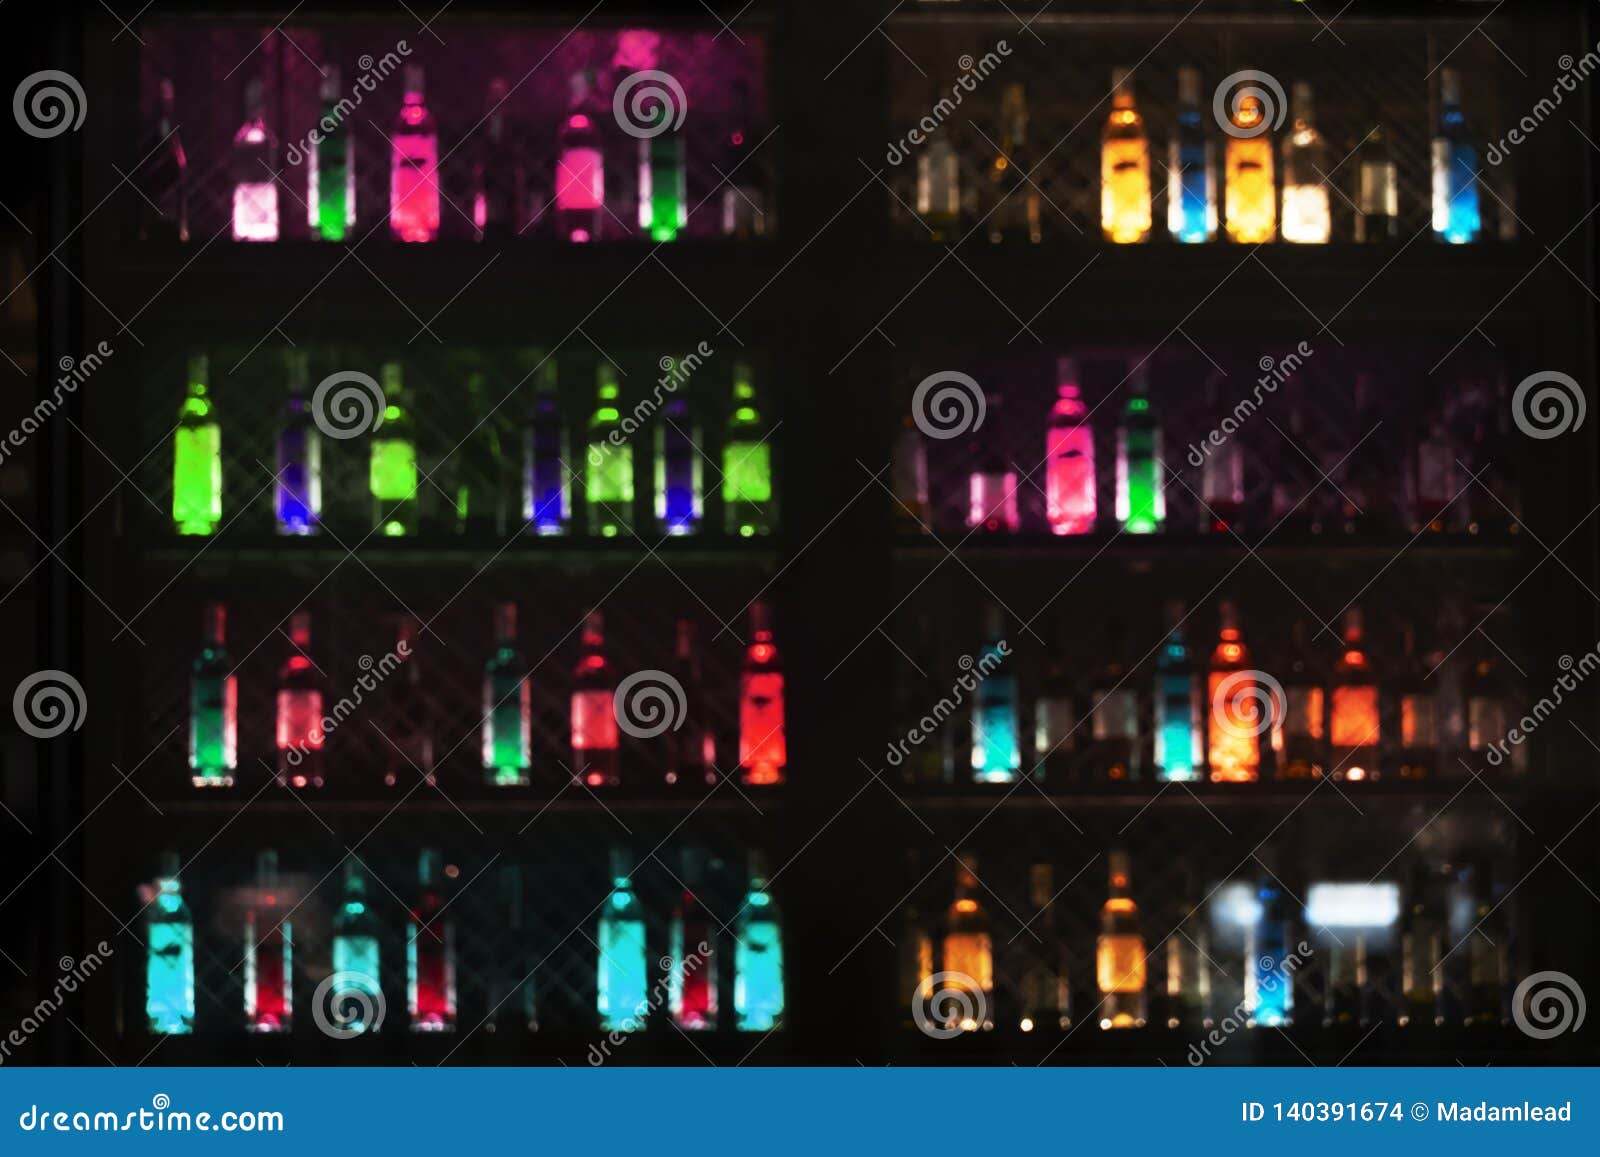 Blur Glowing Neon Light of Alcohol Drinking Bottle in Bar or Pub for Dark  Night Party Background Stock Photo - Image of color, background: 140391674